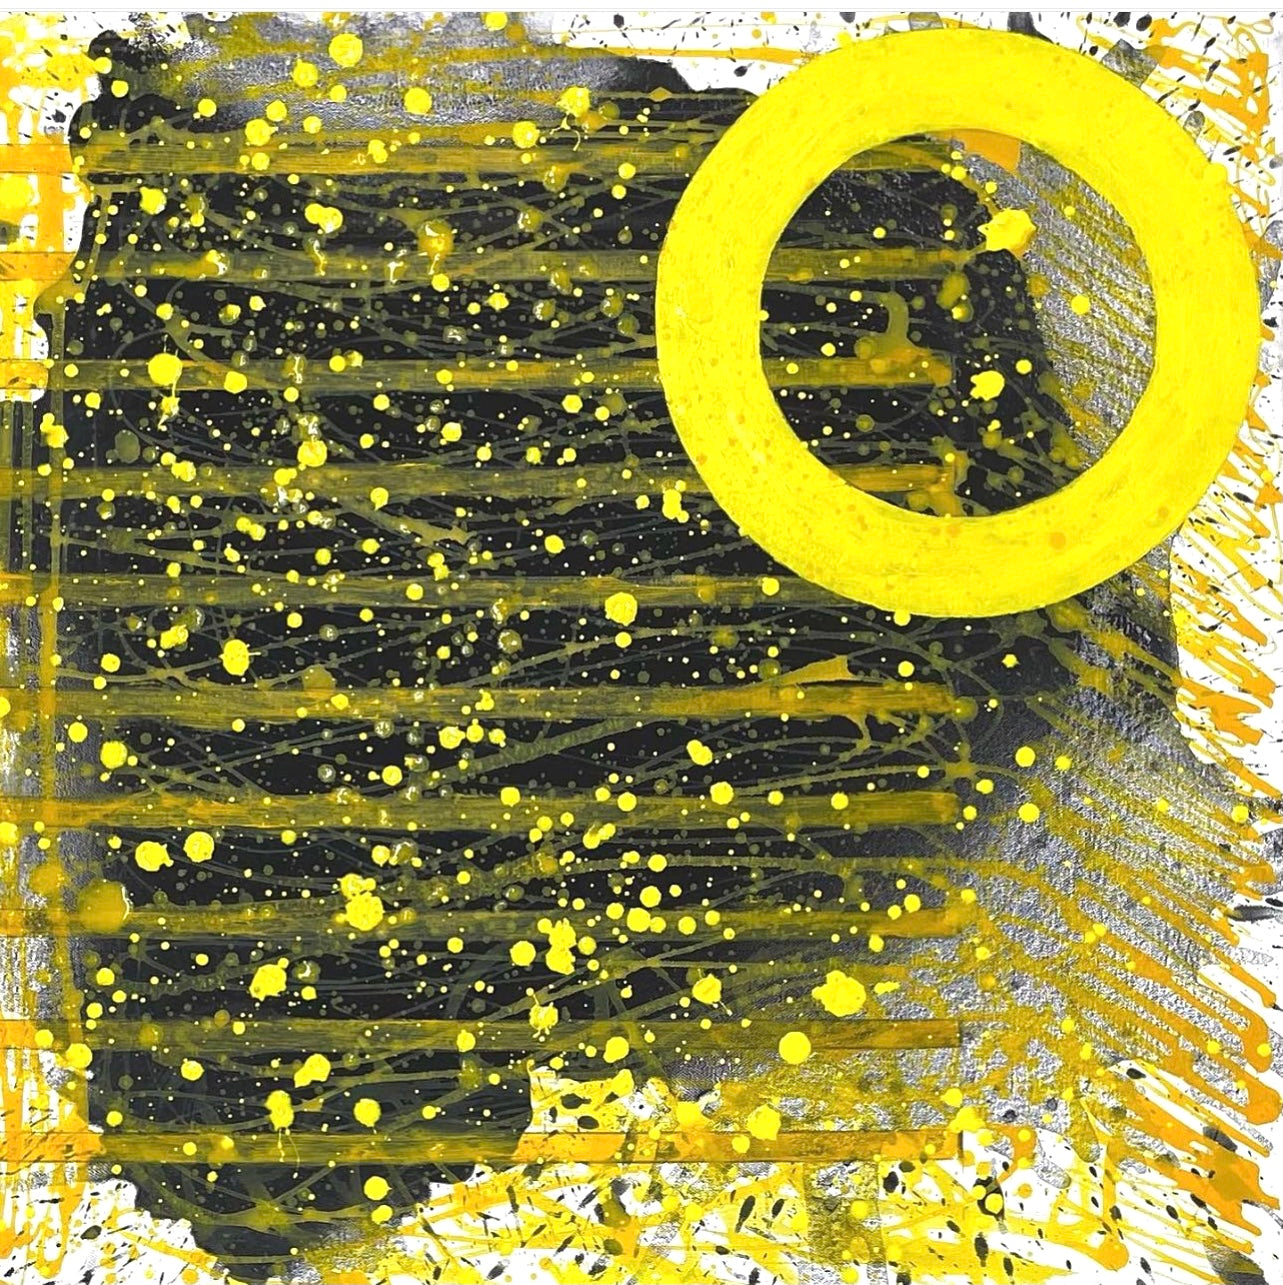 J.Steven Manolis, Sunshine (The Light after the Darkness) 24.24.01, 2020, acrylic painting on canvas, 24 x 24 inches, Sunshine art, Yellow Abstract Art for Sale at Manolis Projects Art Gallery, Miami Fl